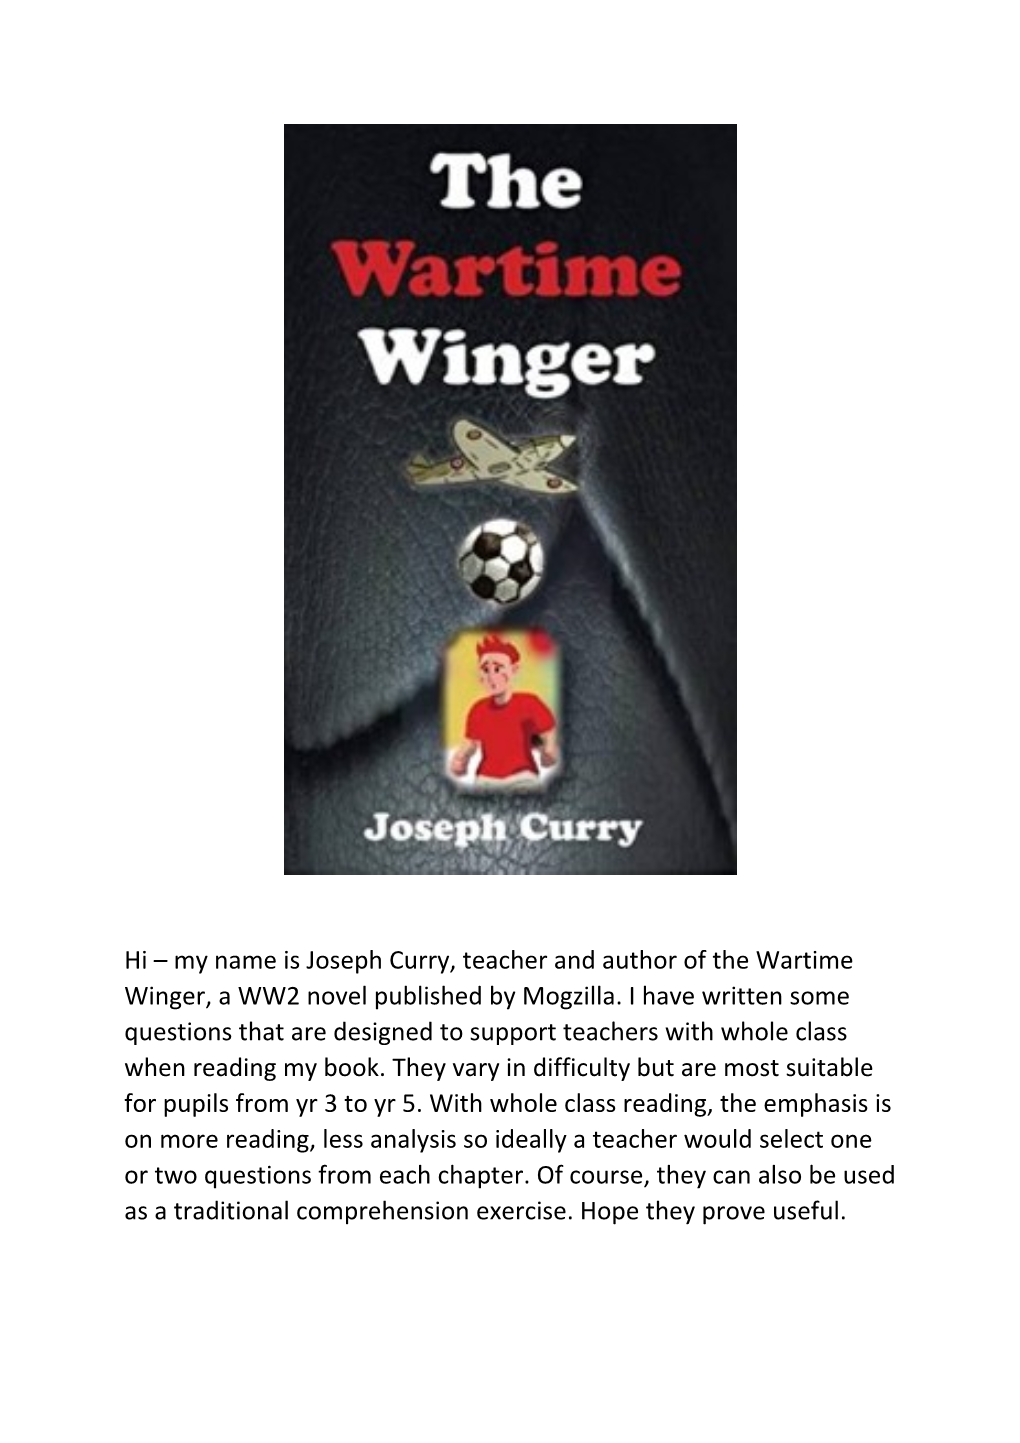 Hi My Name Is Joseph Curry, Teacher and Author of the Wartime Winger, a WW2 Novel Published